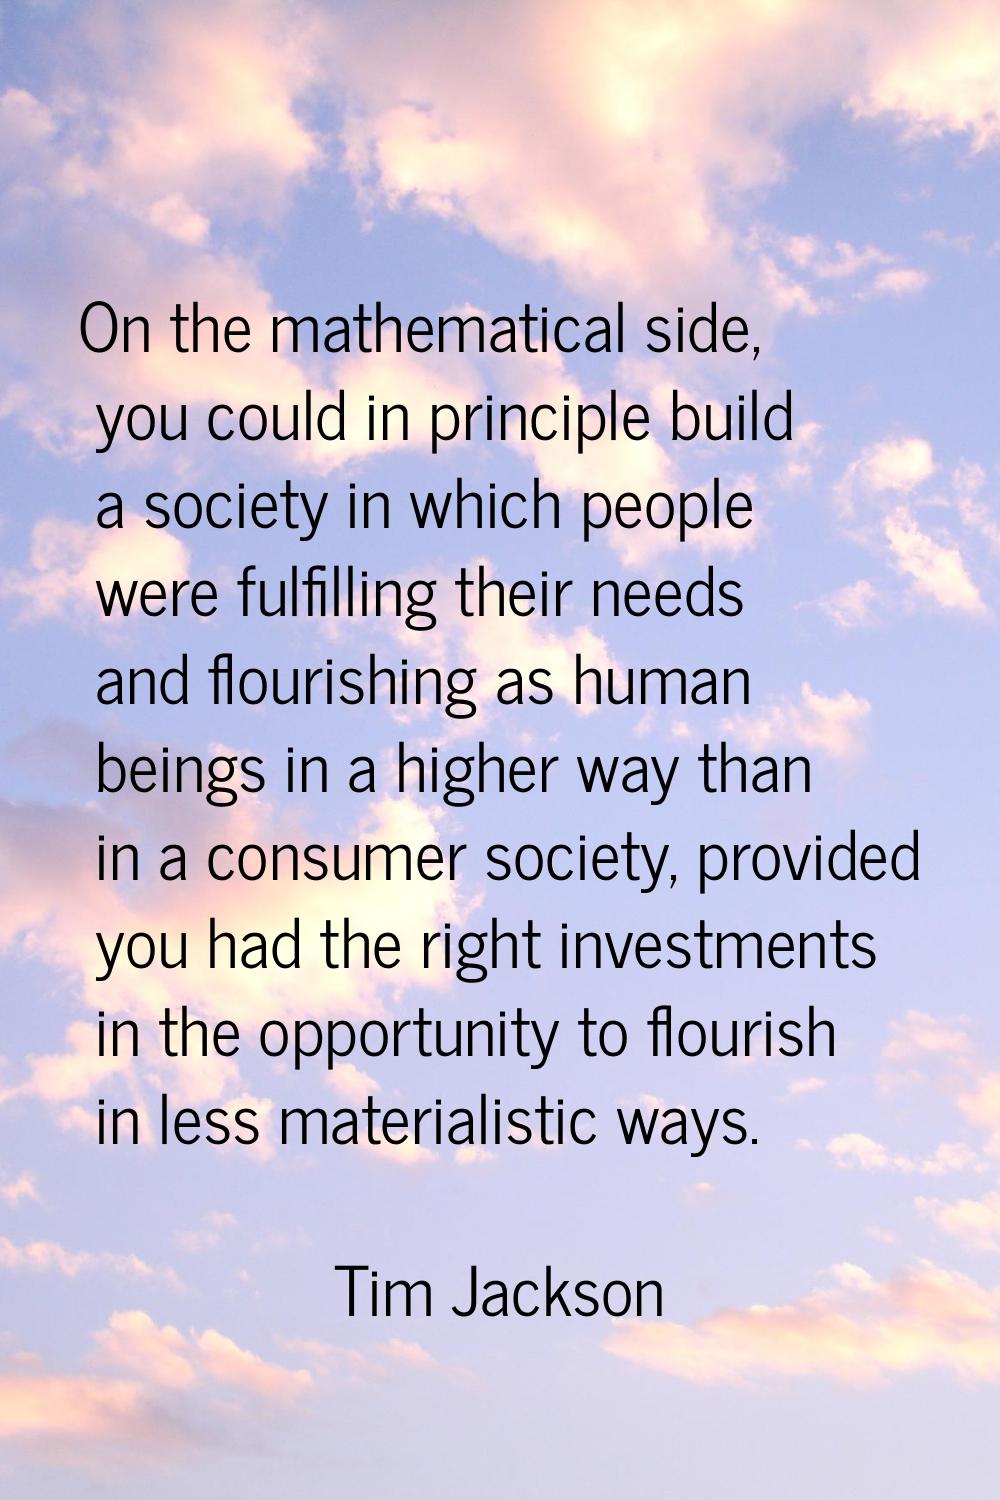 On the mathematical side, you could in principle build a society in which people were fulfilling th